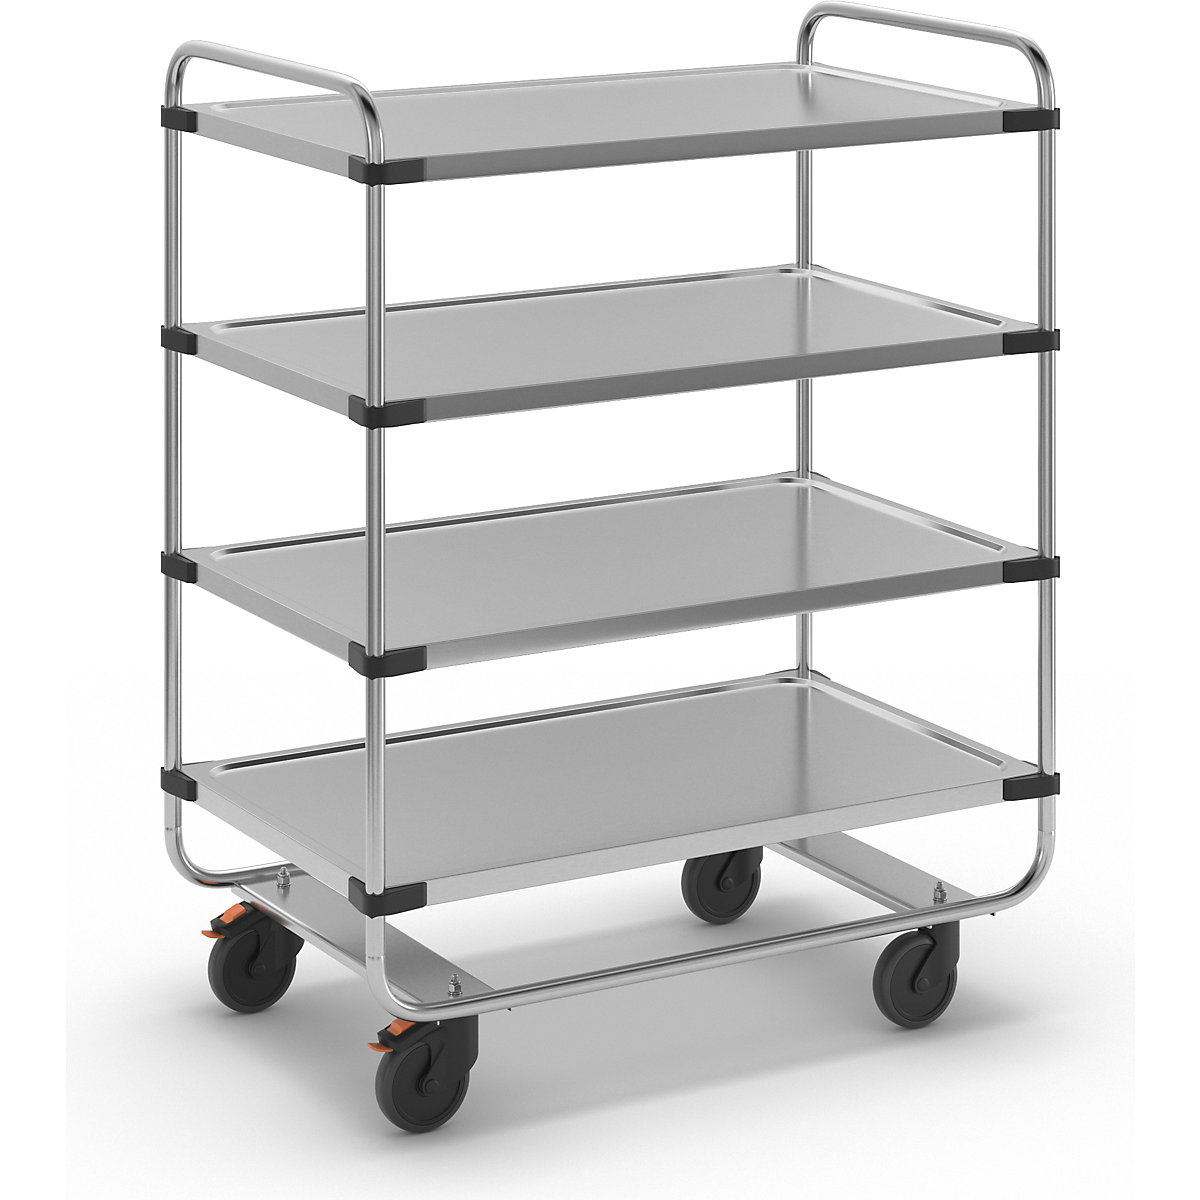 Stainless steel serving trolley, assembled, with 4 shelves, LxWxH 1035 x 635 x 1310 mm-1